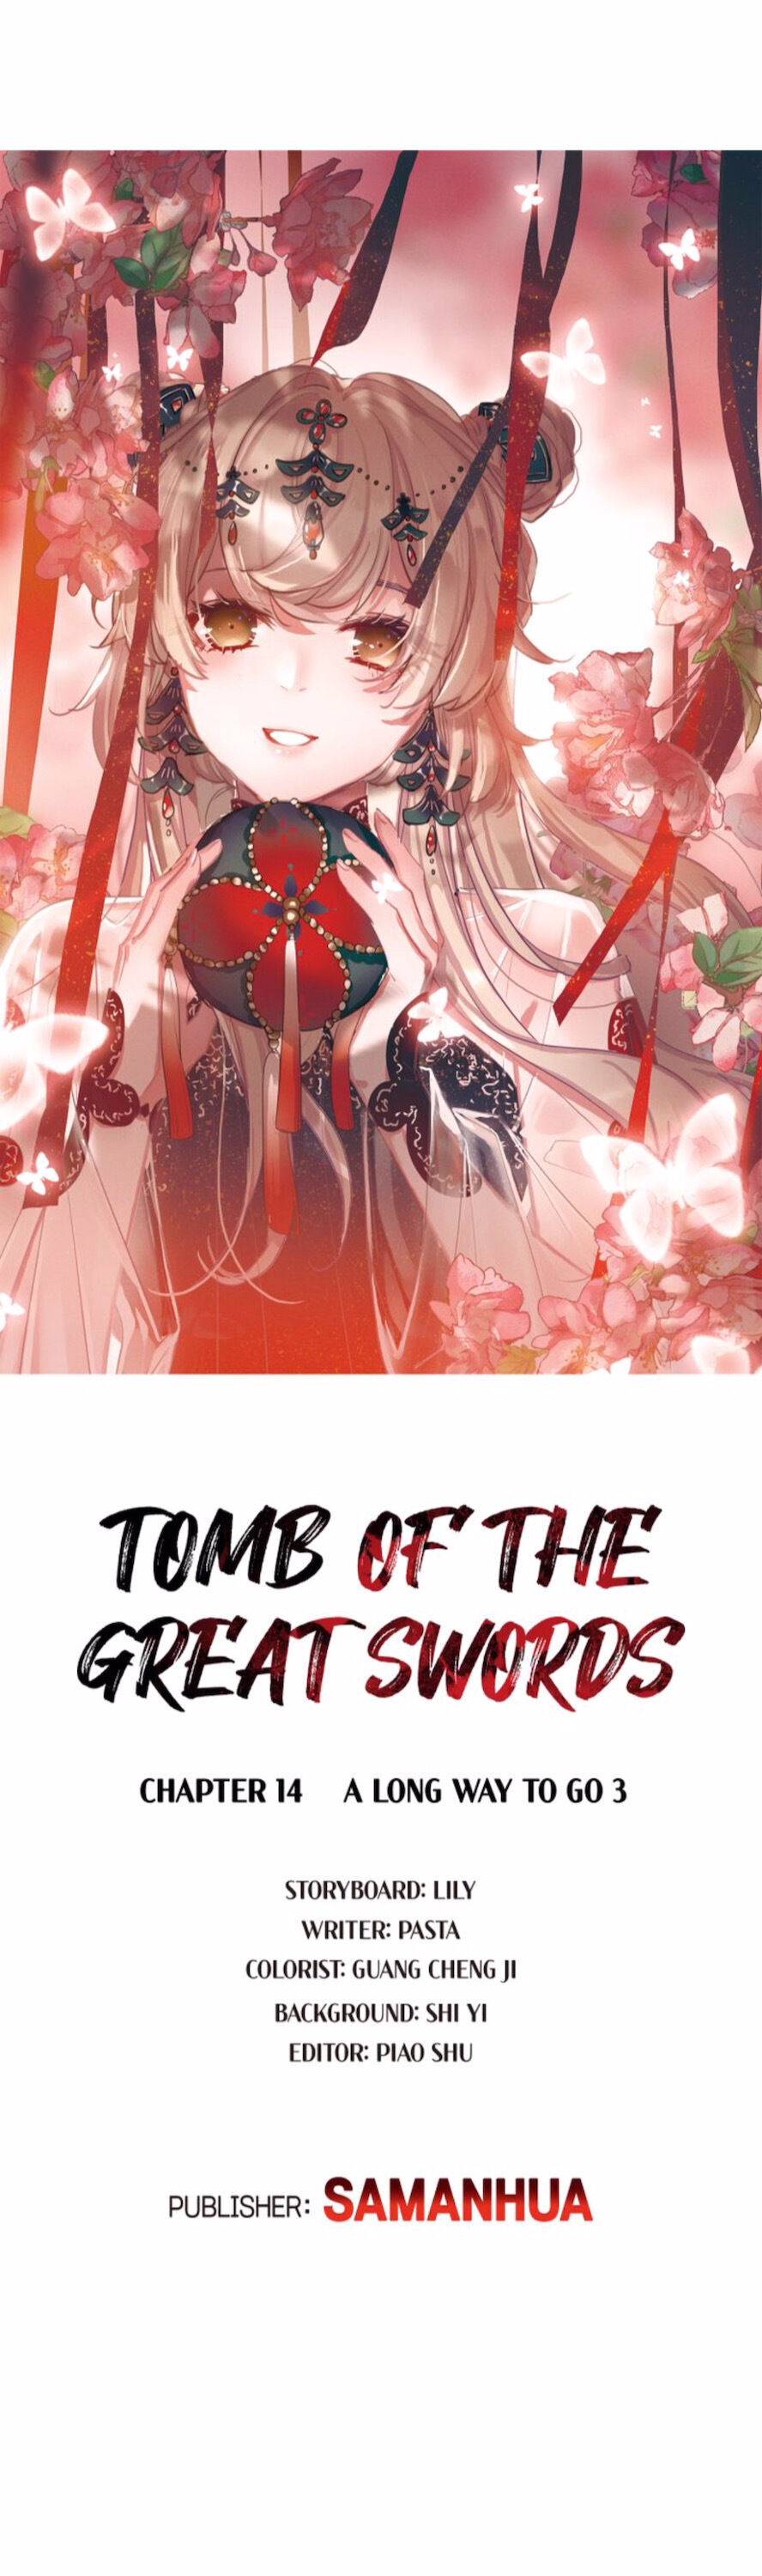 Tomb of the Great Swords Chapter 14